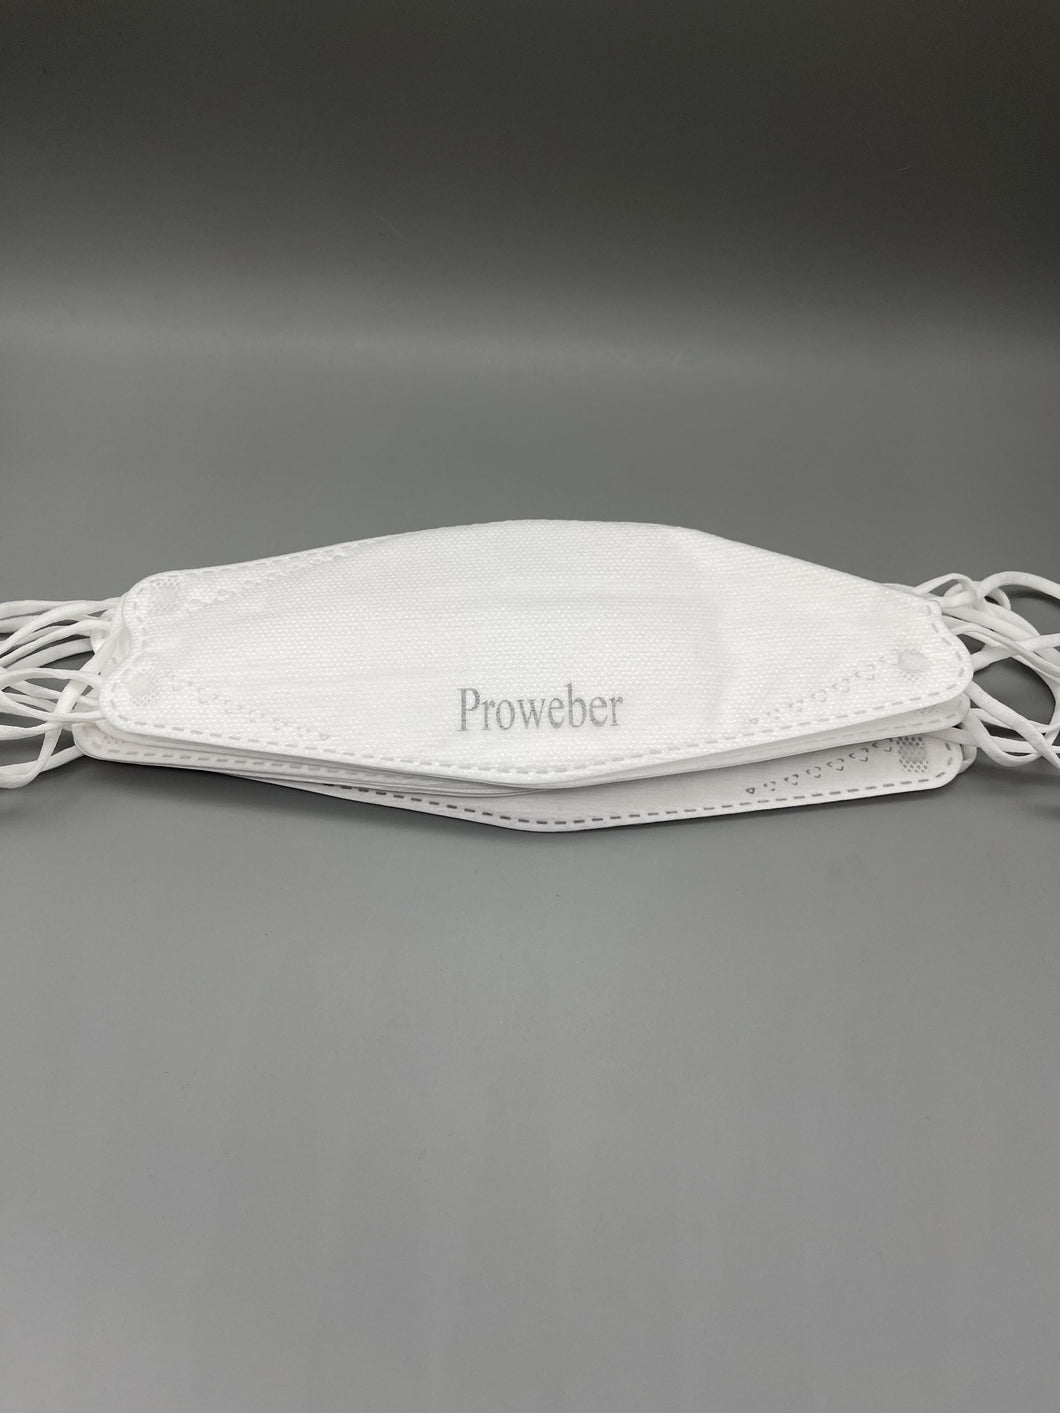 Proweber Anti-pollution masks, Face Mask 25 Pack, 5-Layers Mask Protection, Breathable Proweber Anti-pollution masks White, Filter Efficiency Over 95%, Protective Masks for Indoor and Outdoor Use (White Mask)